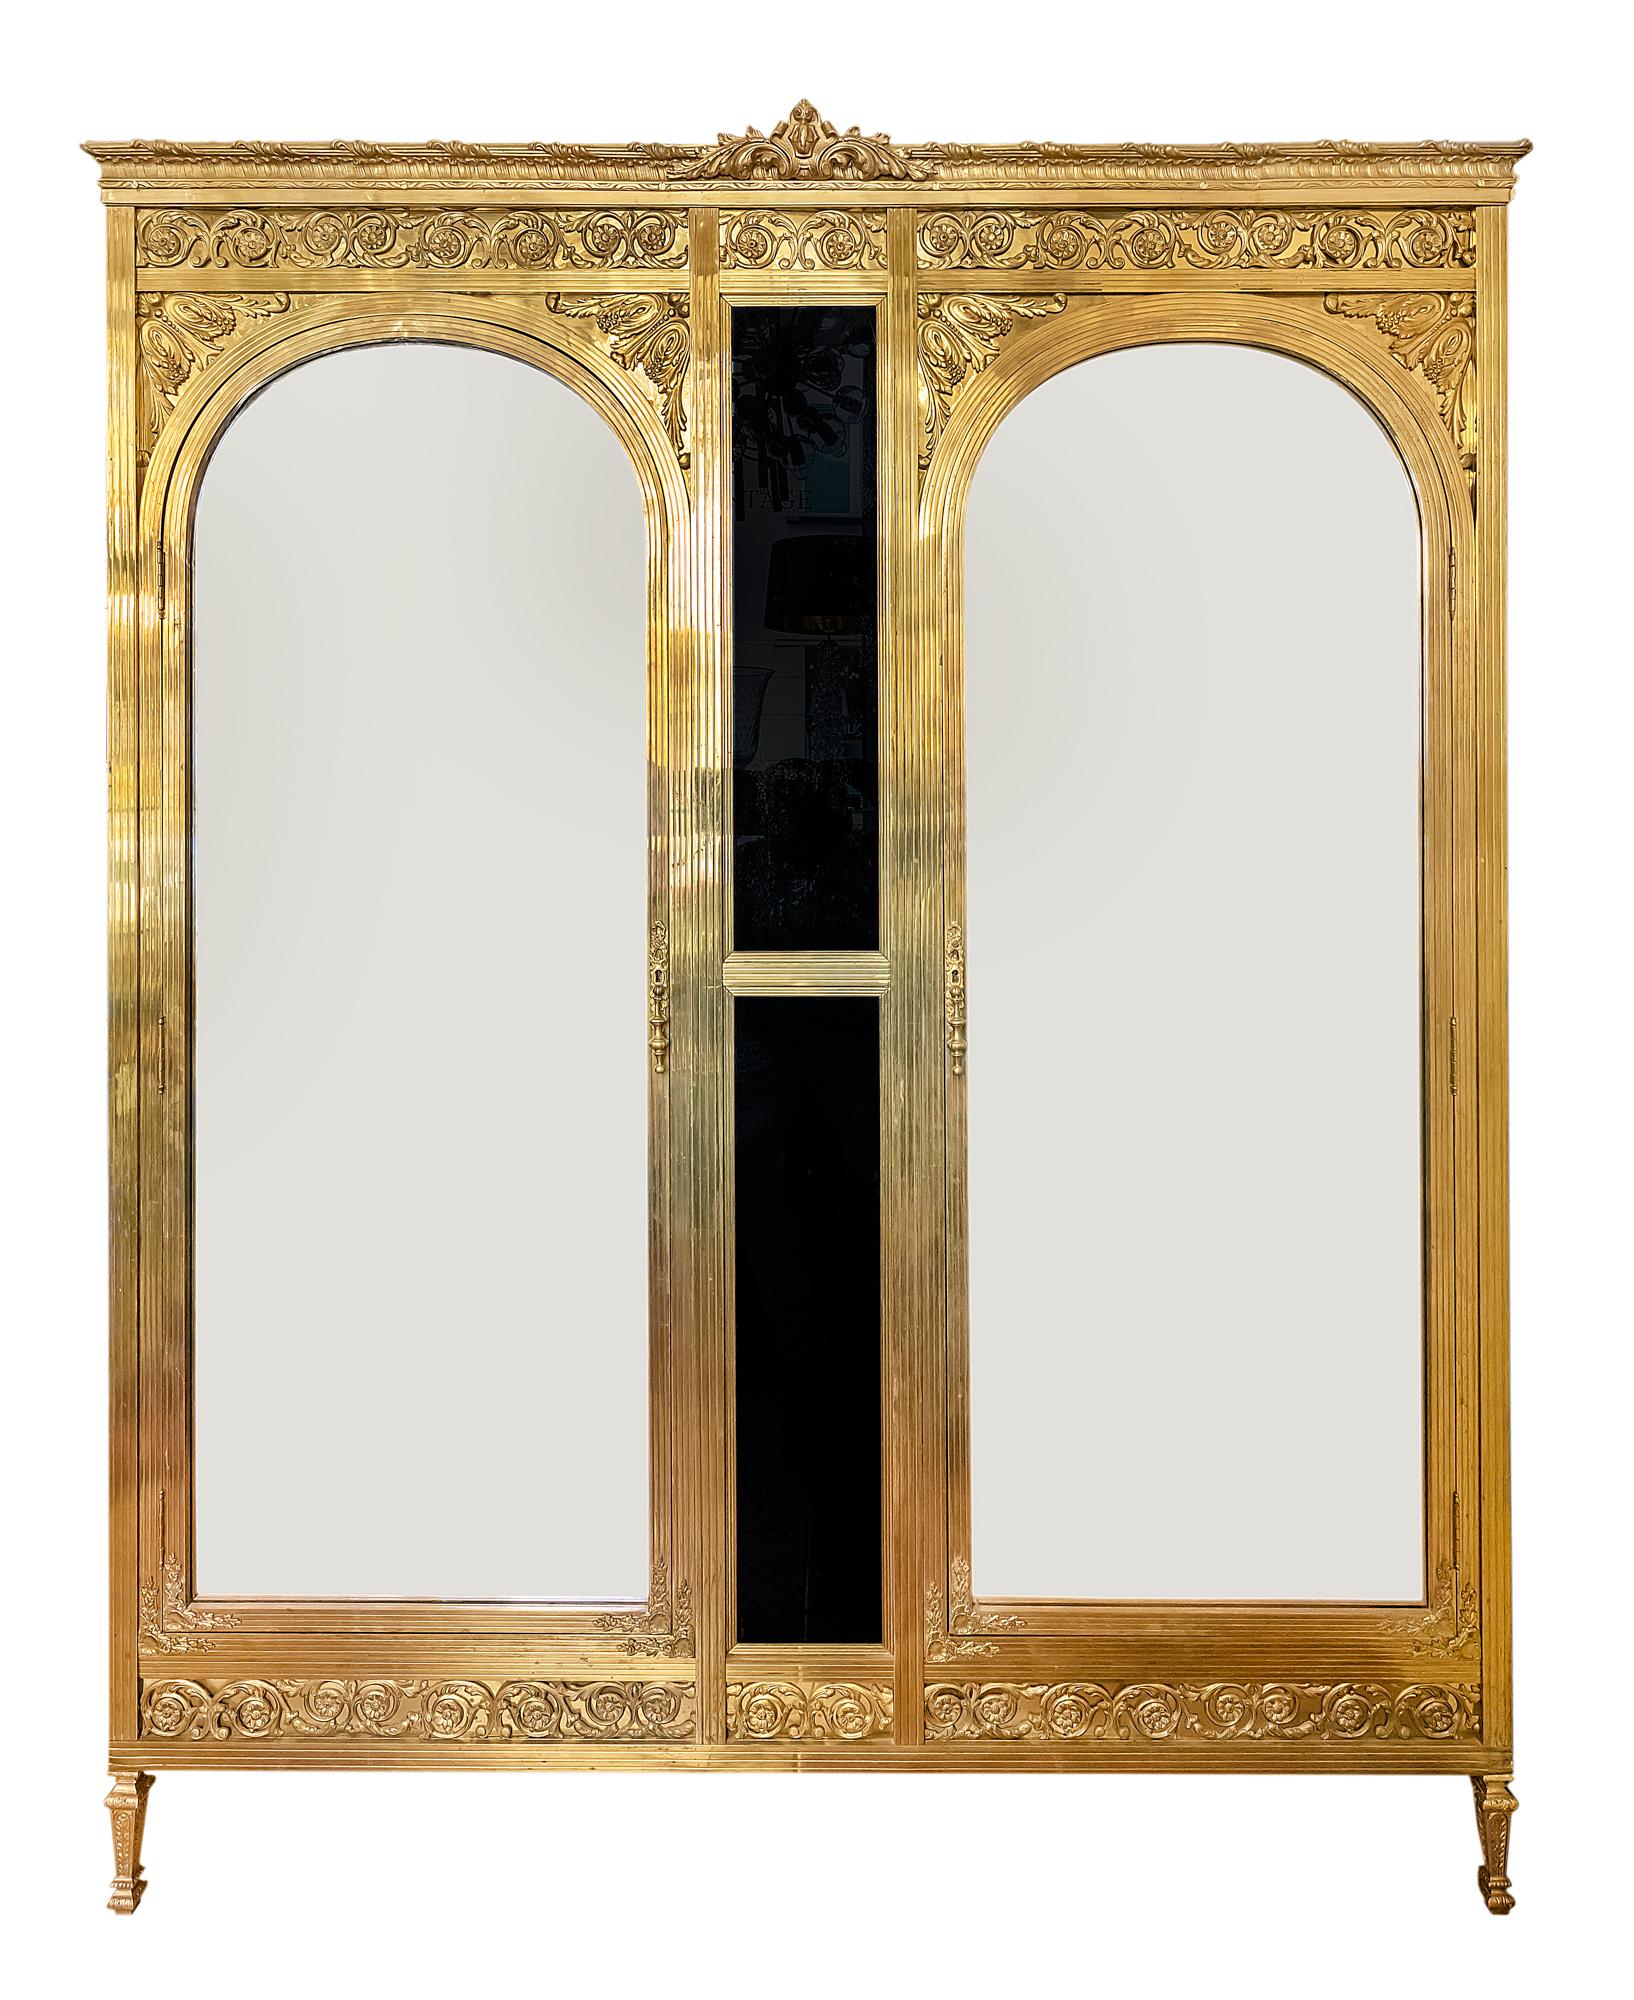 Antique French Napoleon III style wardrobe, circa 1900. 
All the construction and legs are made in bronze, sides with black colour glass, front doors with mirror in the arc shape facades.
The wardrobe is decorated with bronze elements.
Inside the